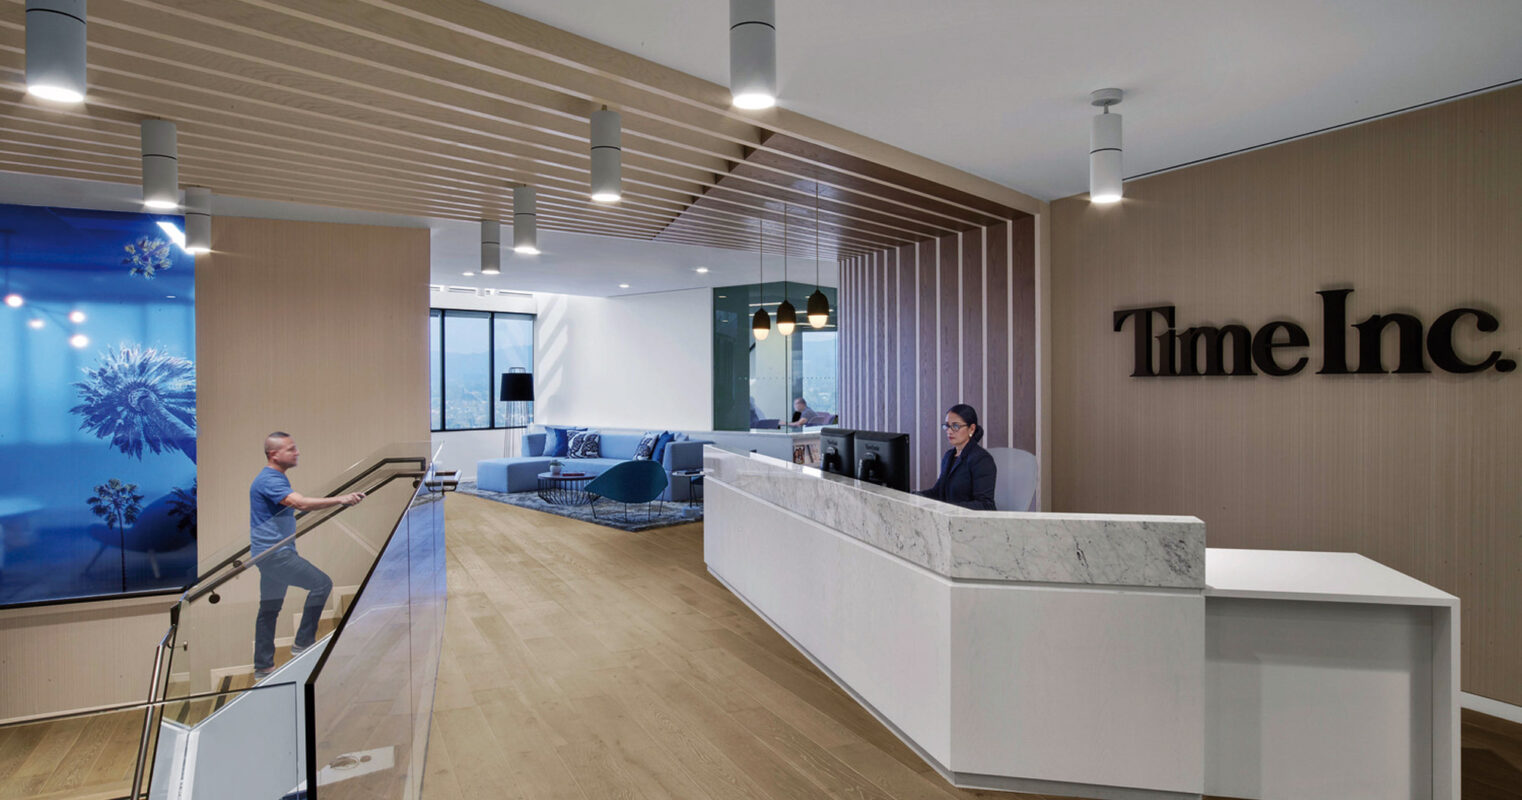 Modern office lobby featuring a sleek white reception counter with the Time Inc. logo on a wooden slat wall. Blue-toned artwork adds a pop of color, complemented by pendant lighting and contemporary seating area in the background.